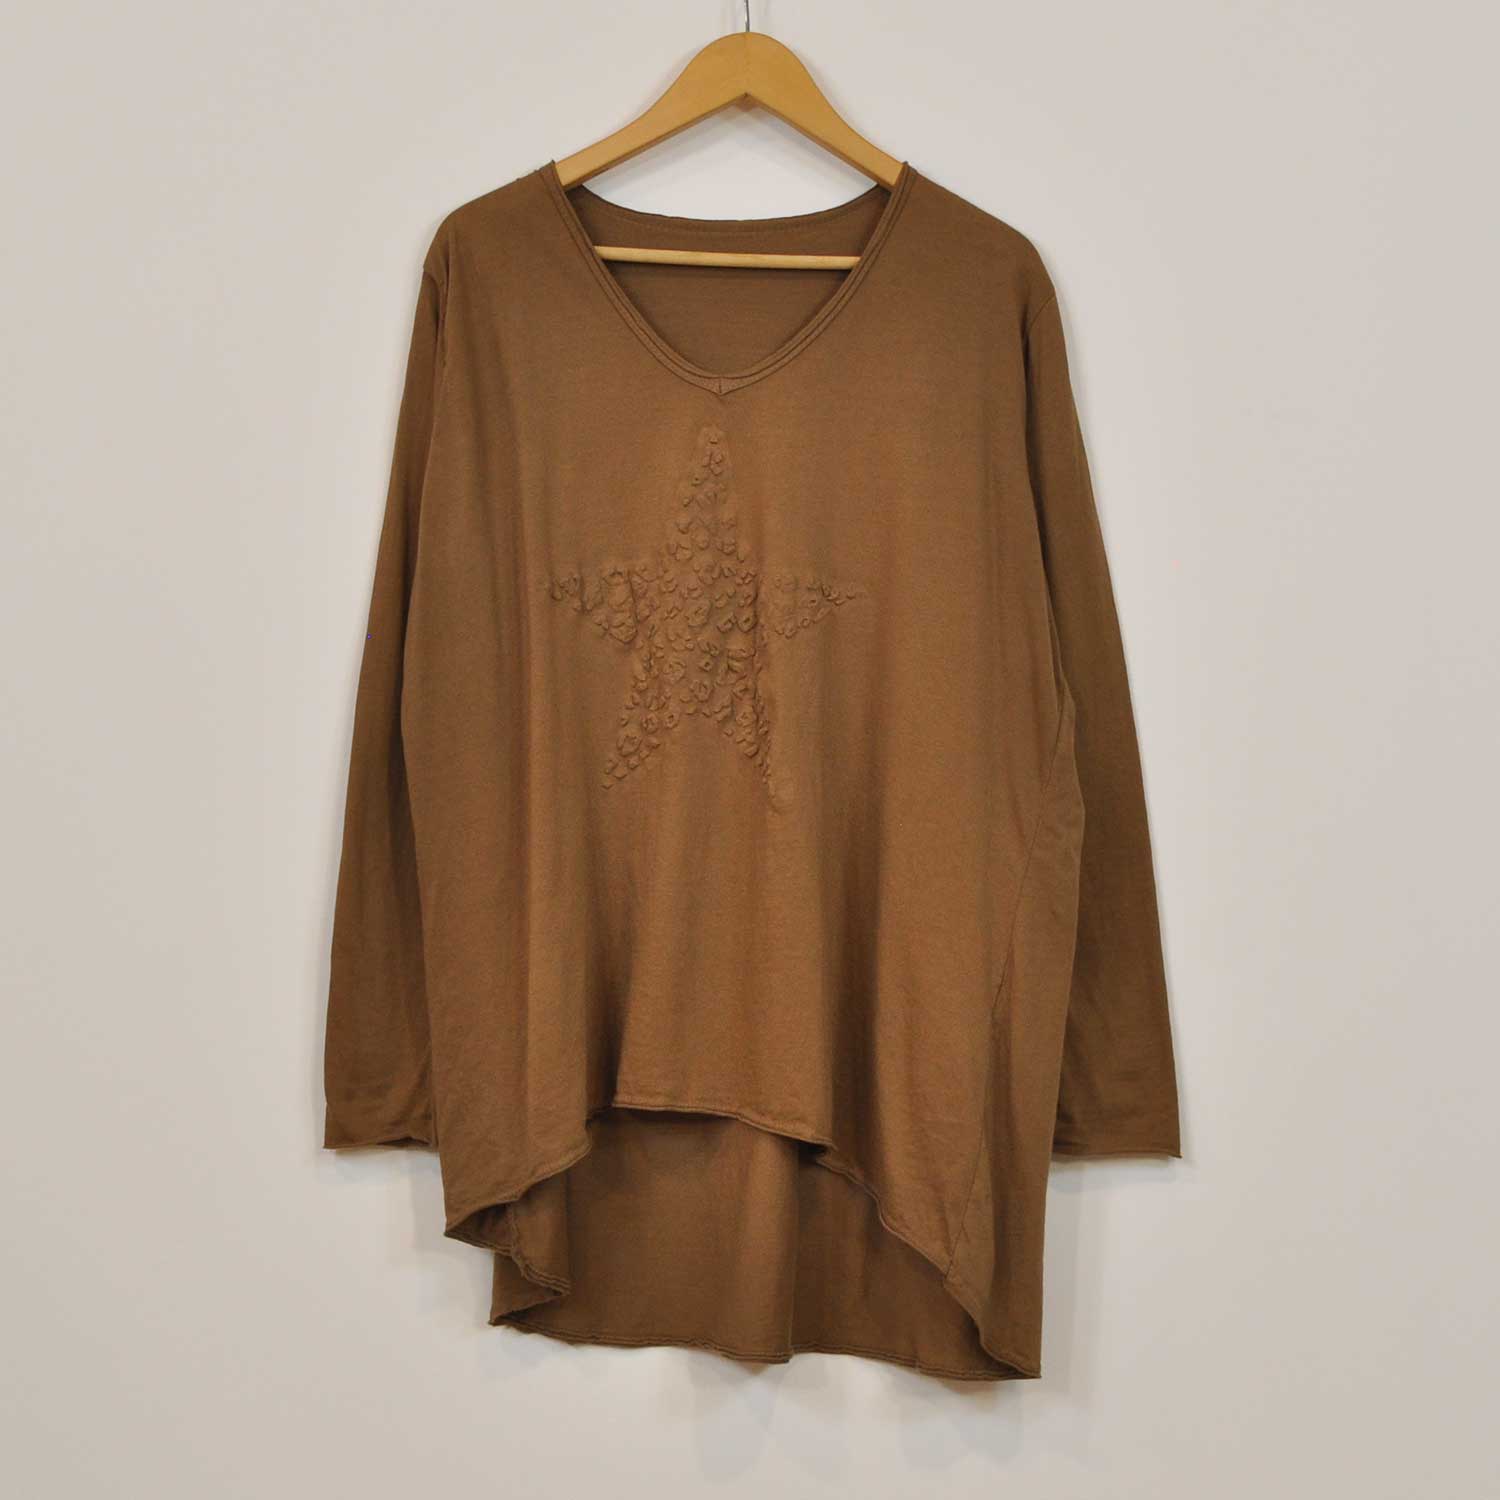 Brown stars relief t-shirt